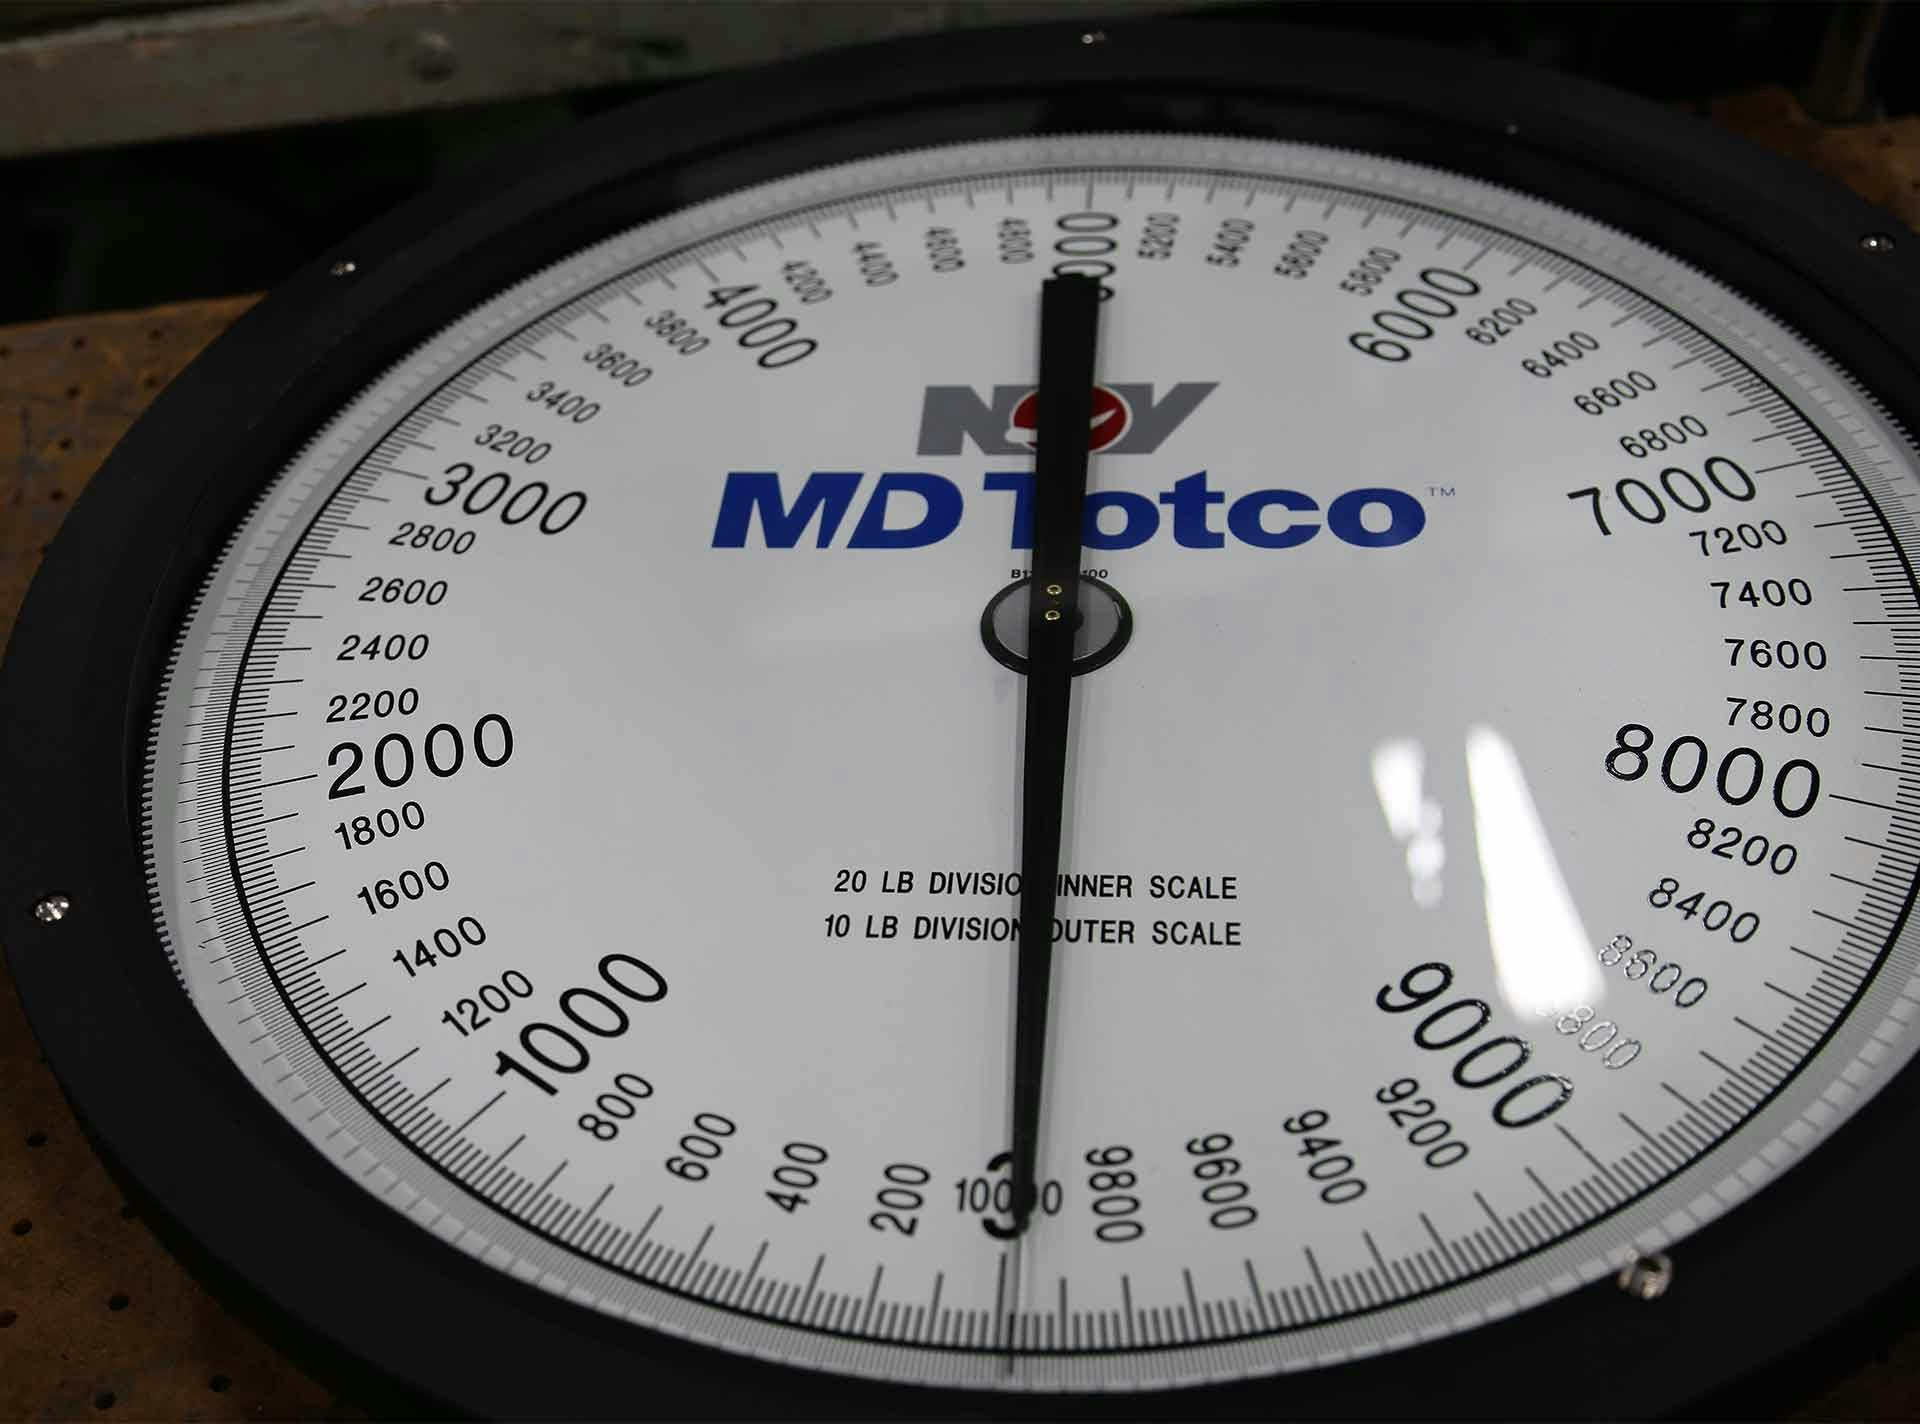 A close up of a scale indicator